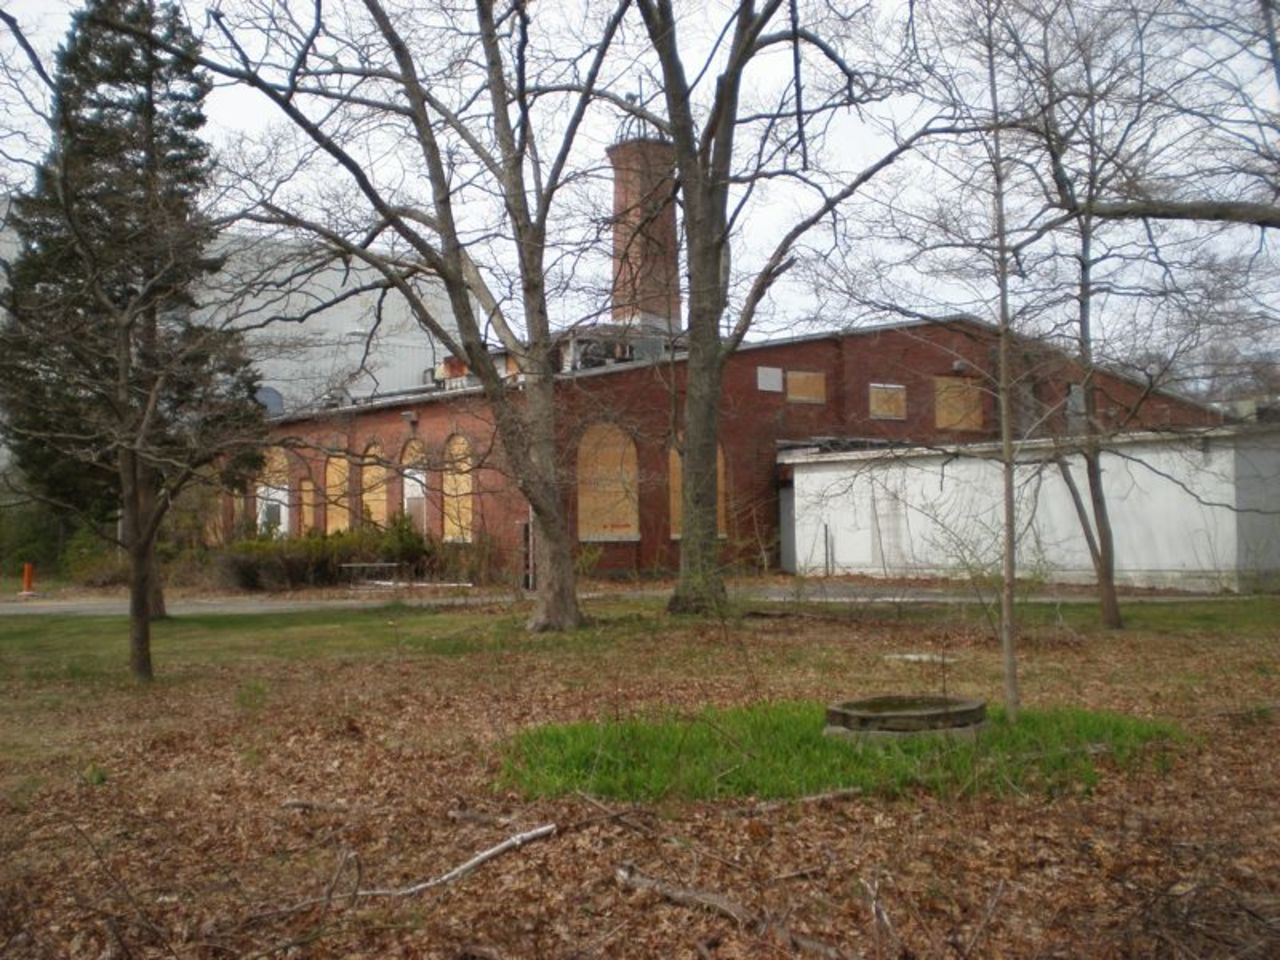 Inman's campaign raised more than $1.3 million to buy the site of <a href="http://www.cnn.com/2012/08/21/tech/innovation/tesla-museum-campaign/">Tesla's former Wardenclyffe laboratory</a> in Shoreham, New York, on the north coast of Long Island.